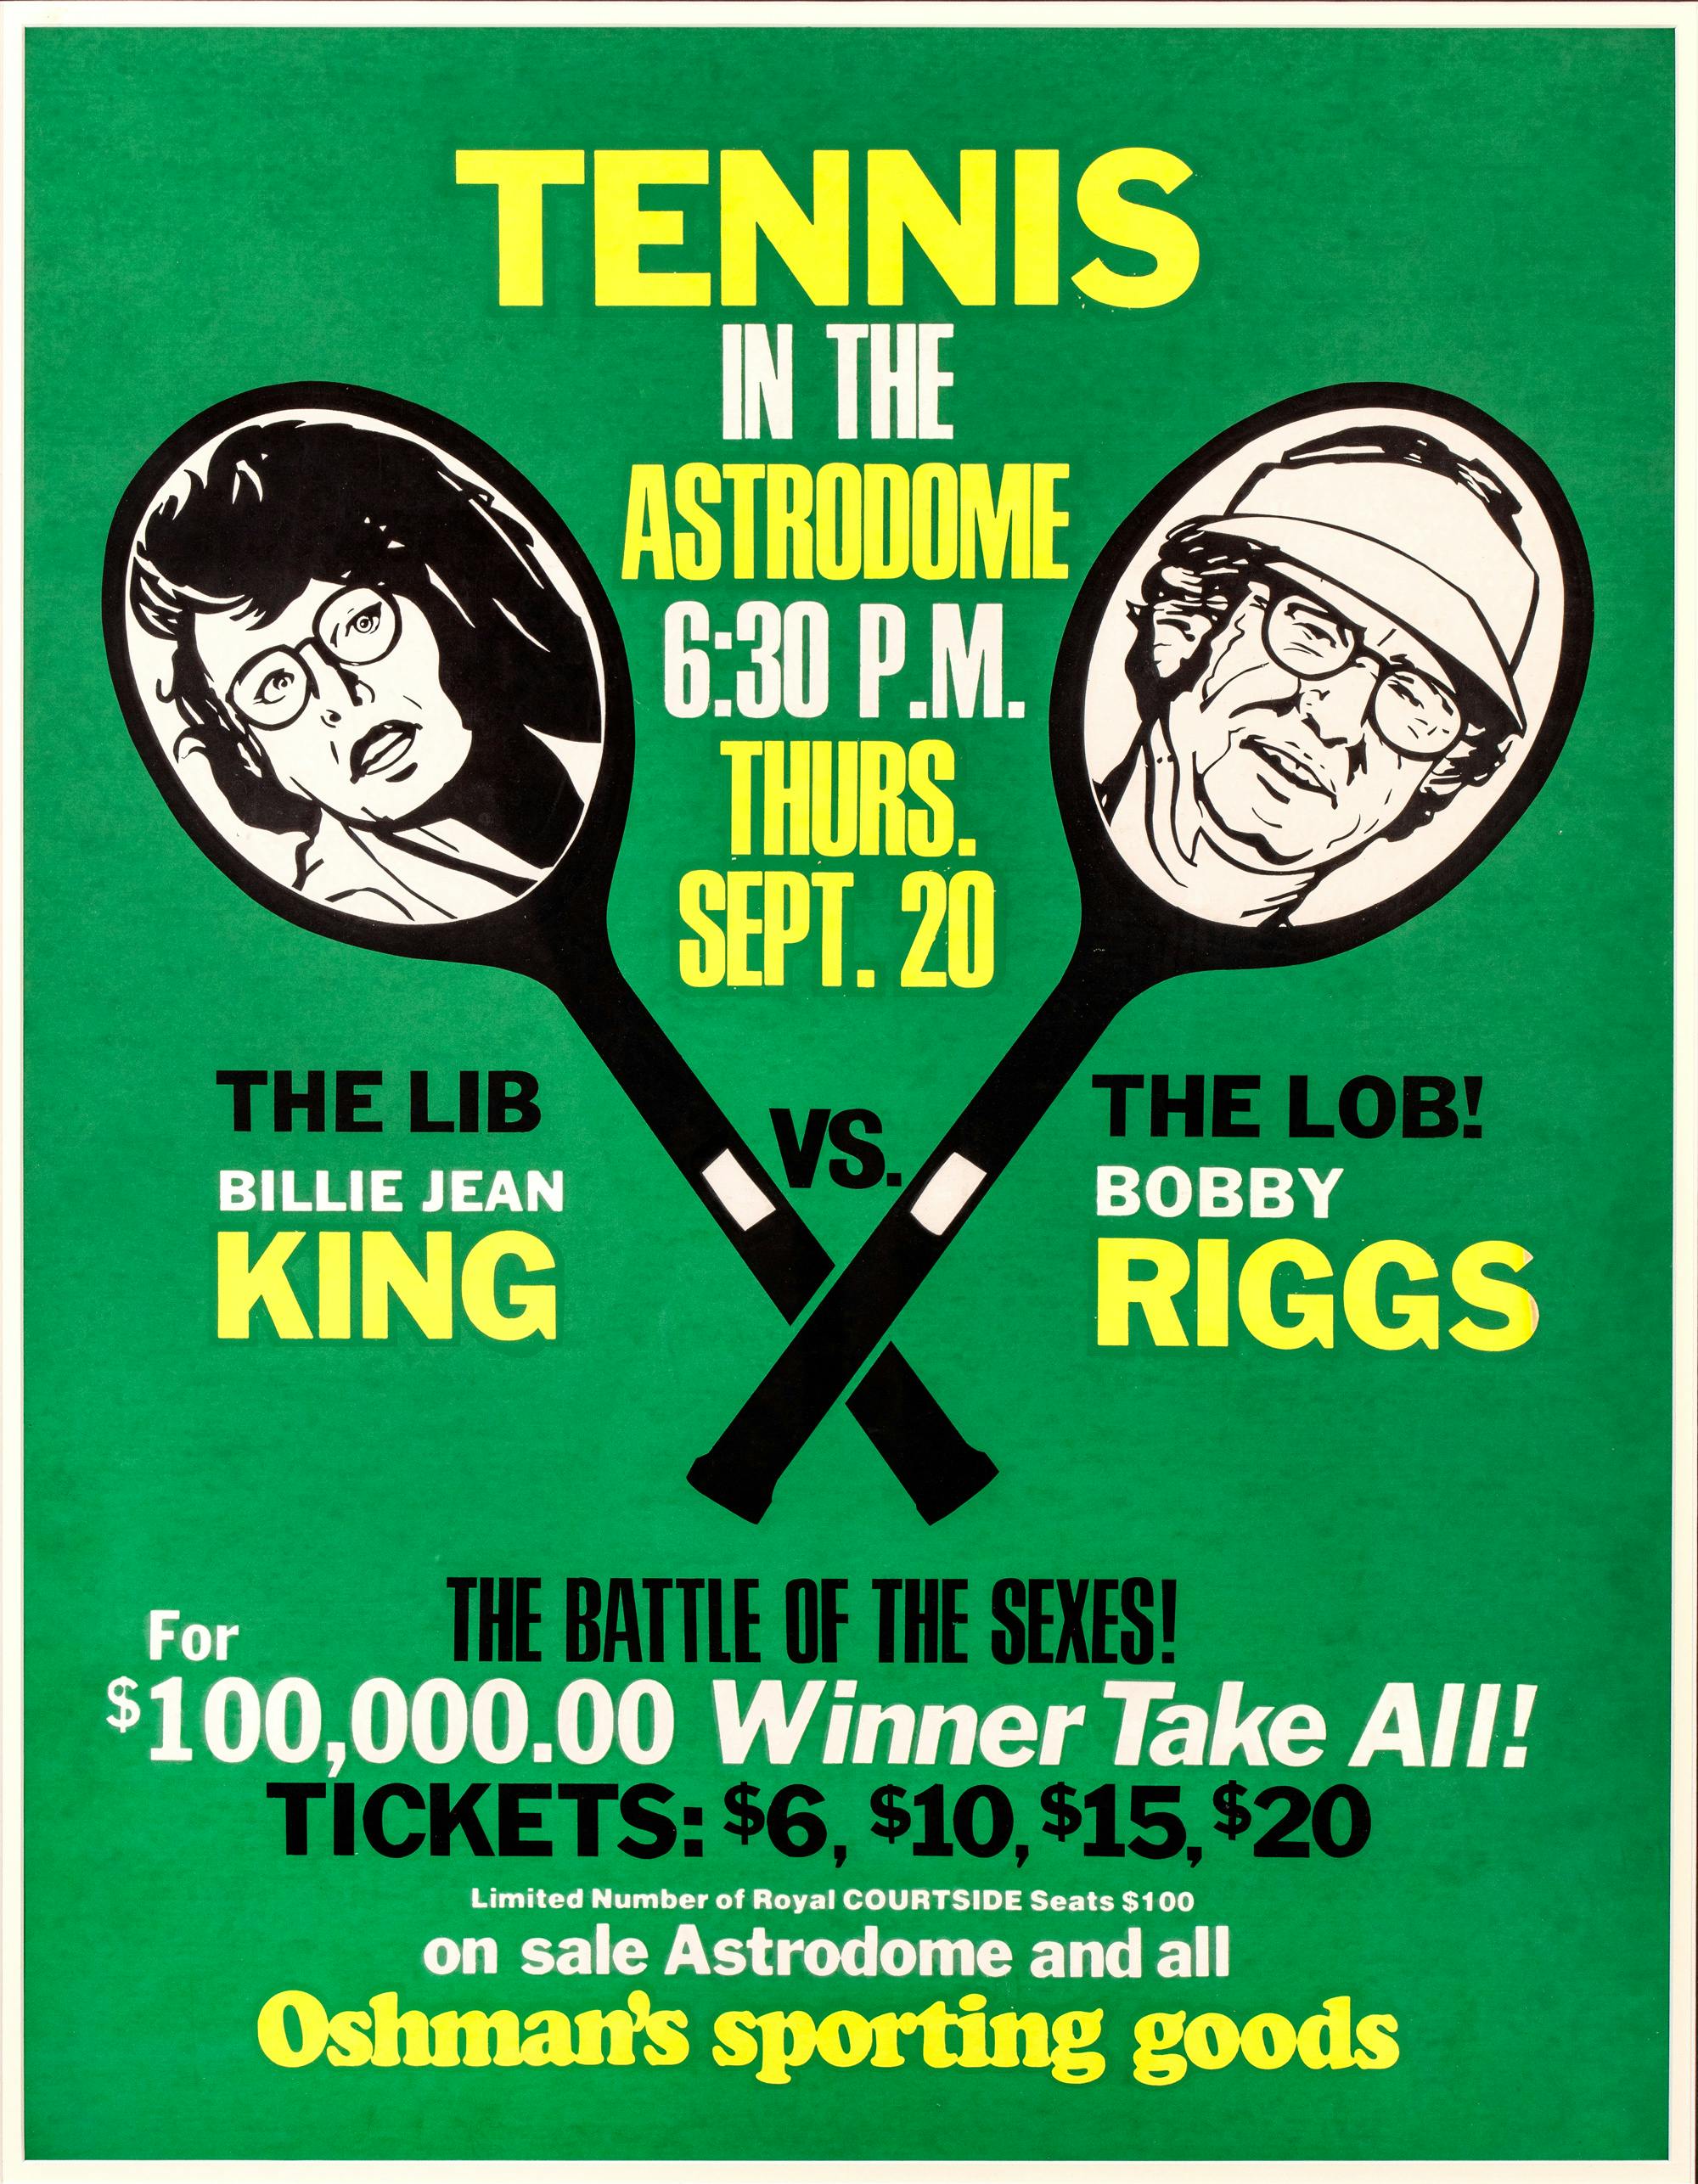 Battle of the Sexes poster from 1973, featuring Billy Jean King and Bobby Riggs